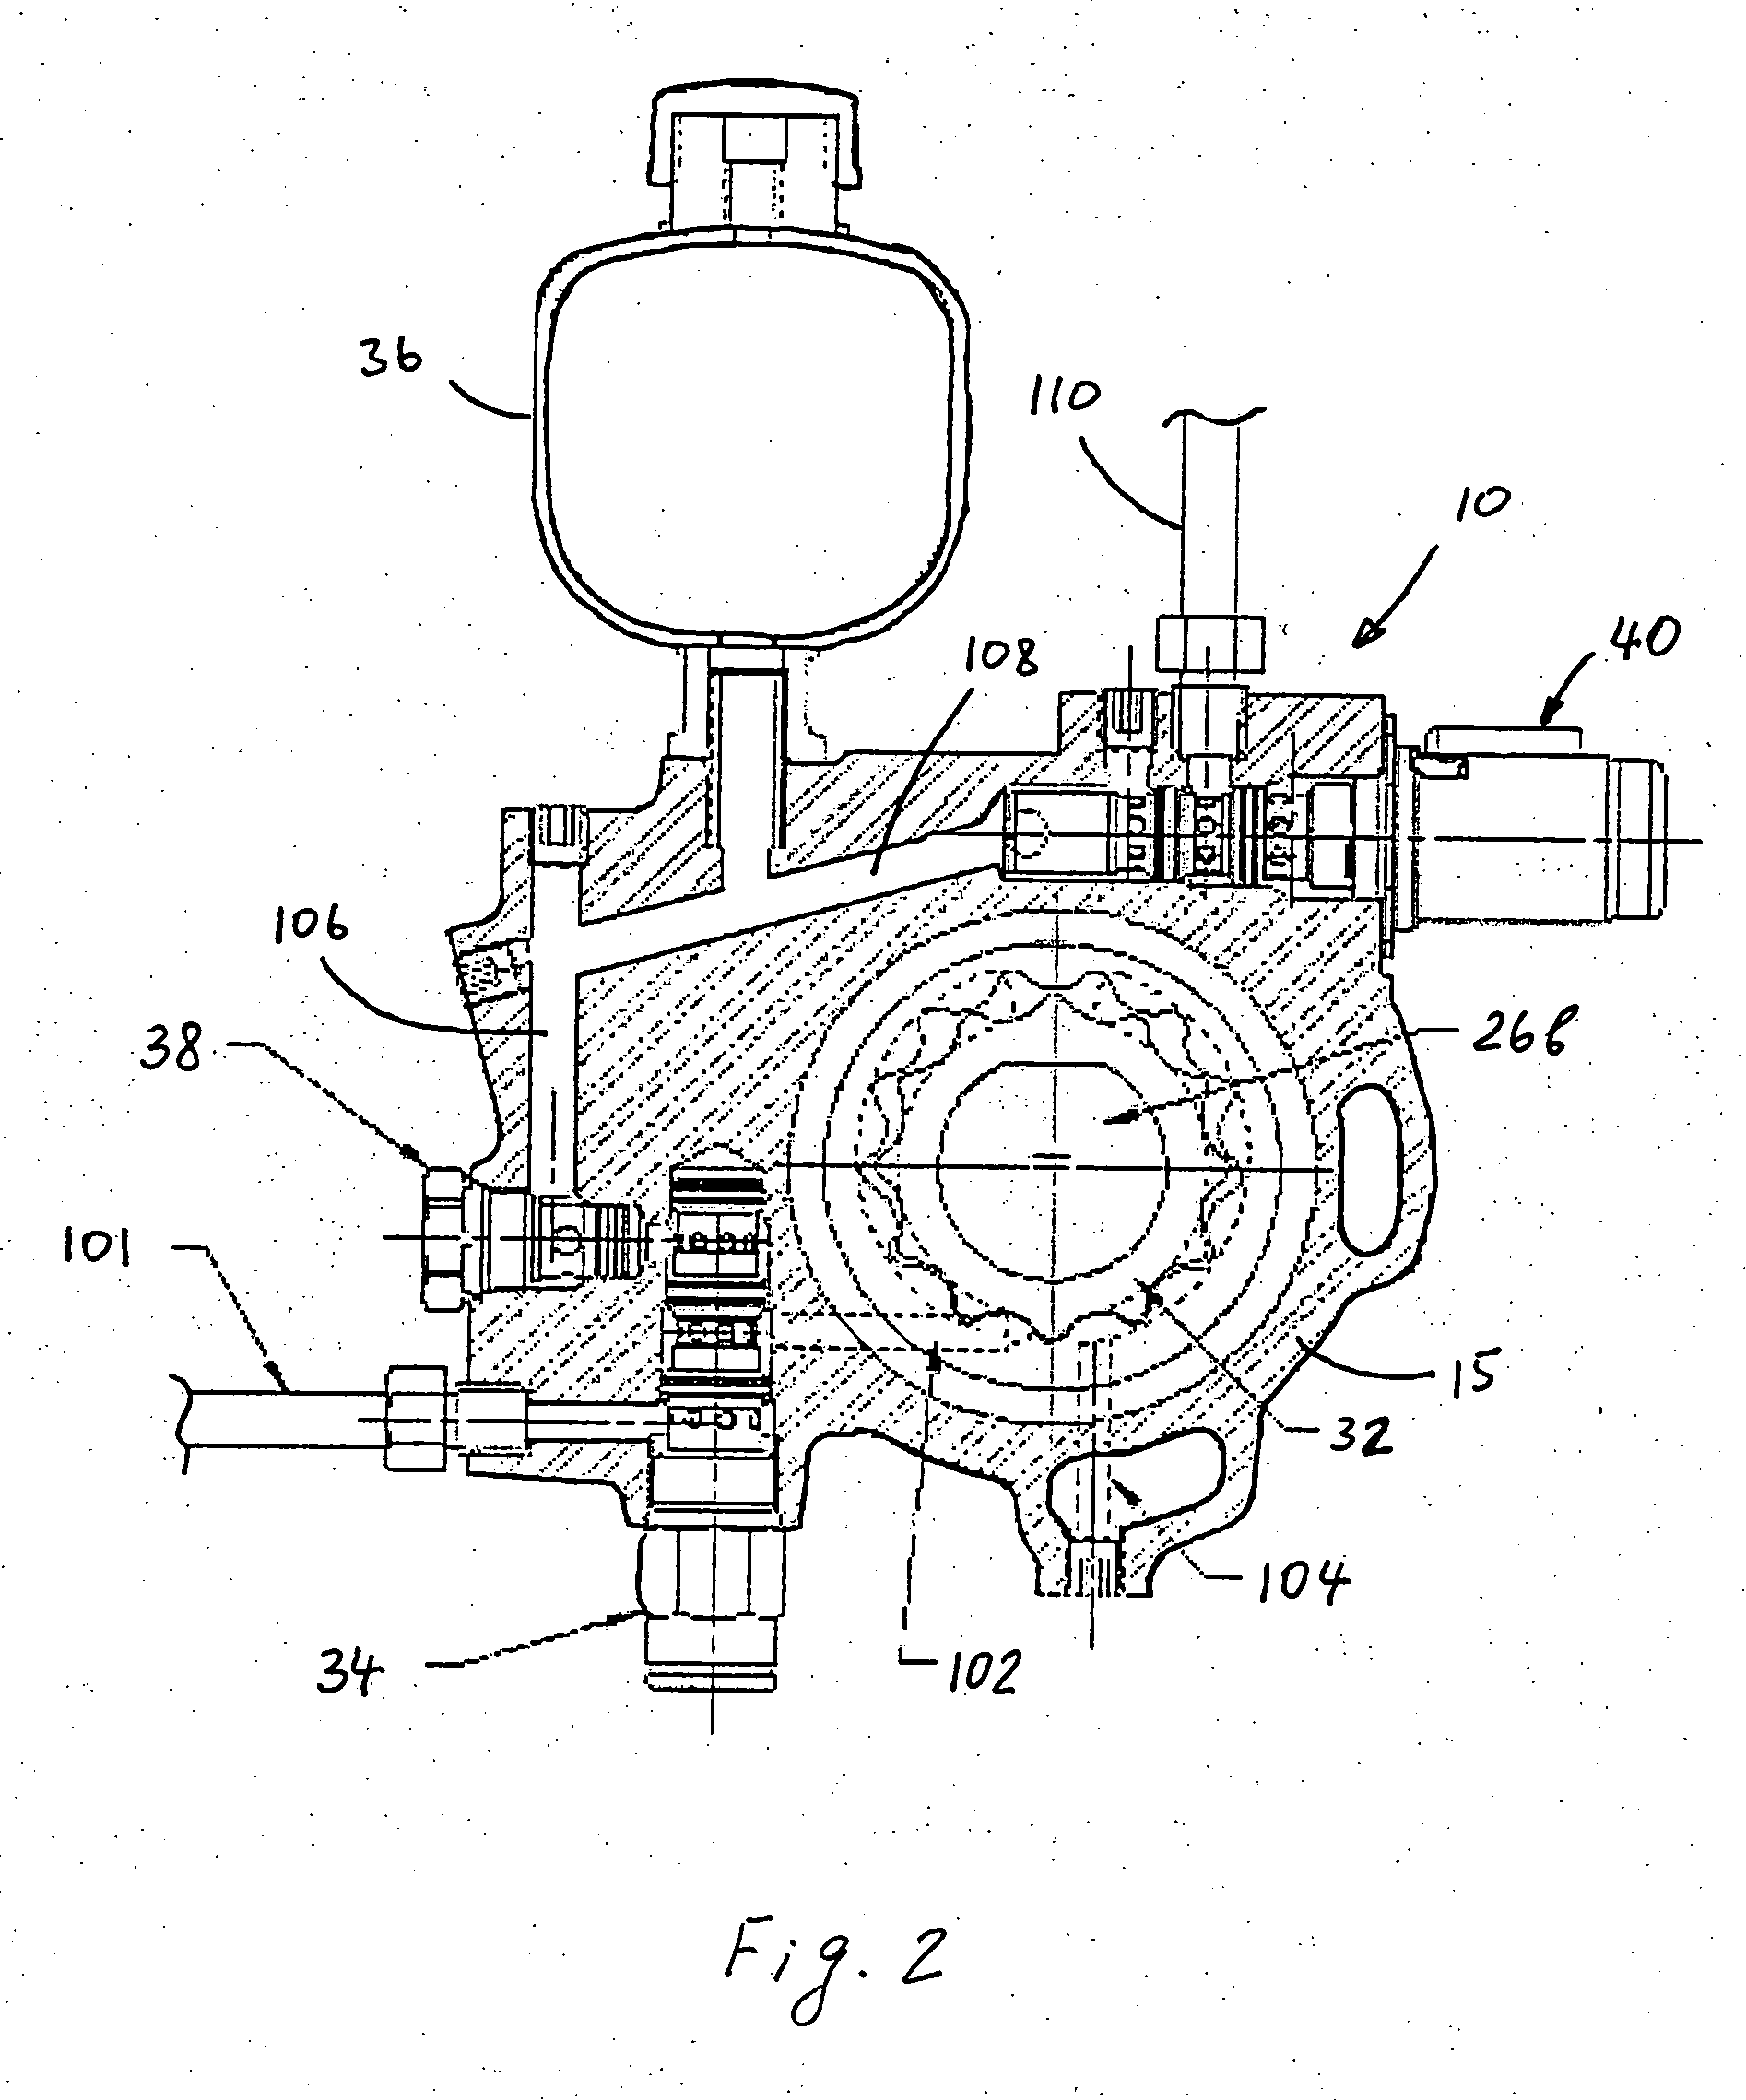 Hydraulic clutch actuator for limited slip differential assembly